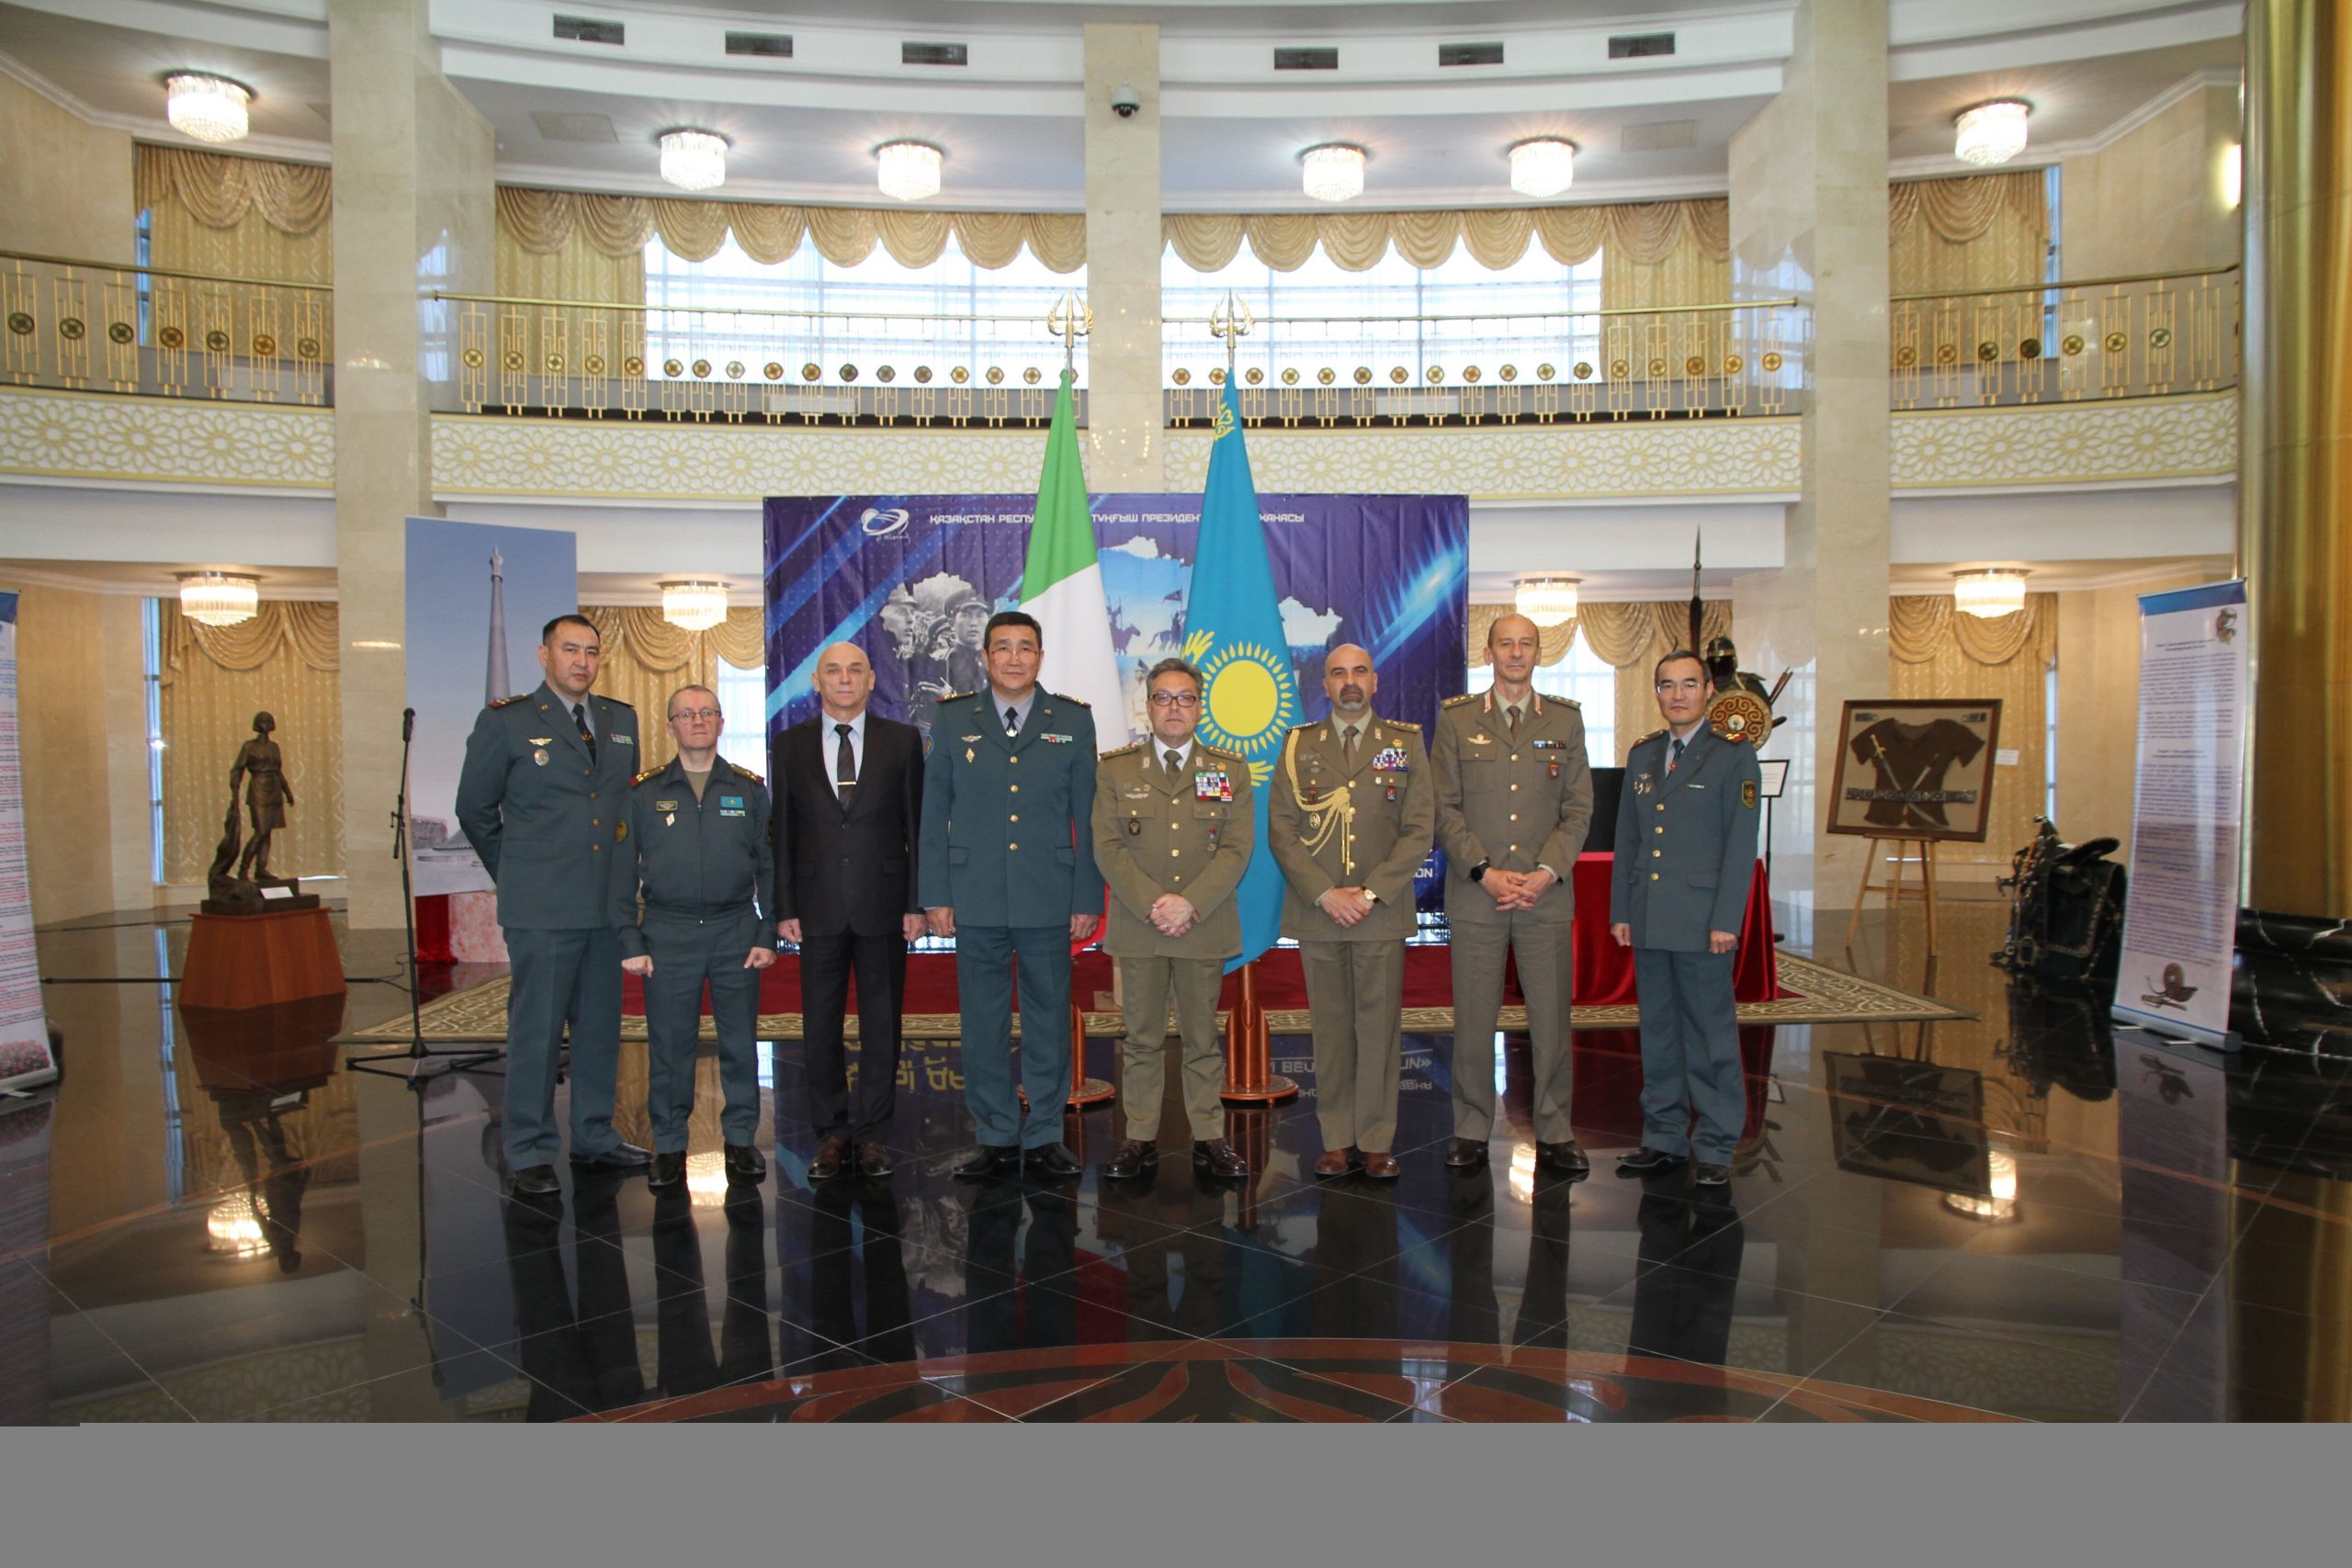 Visit of the delegation of the Institute for Higher Defence Studies and analysis of the Armed Forces of the Italian Republic